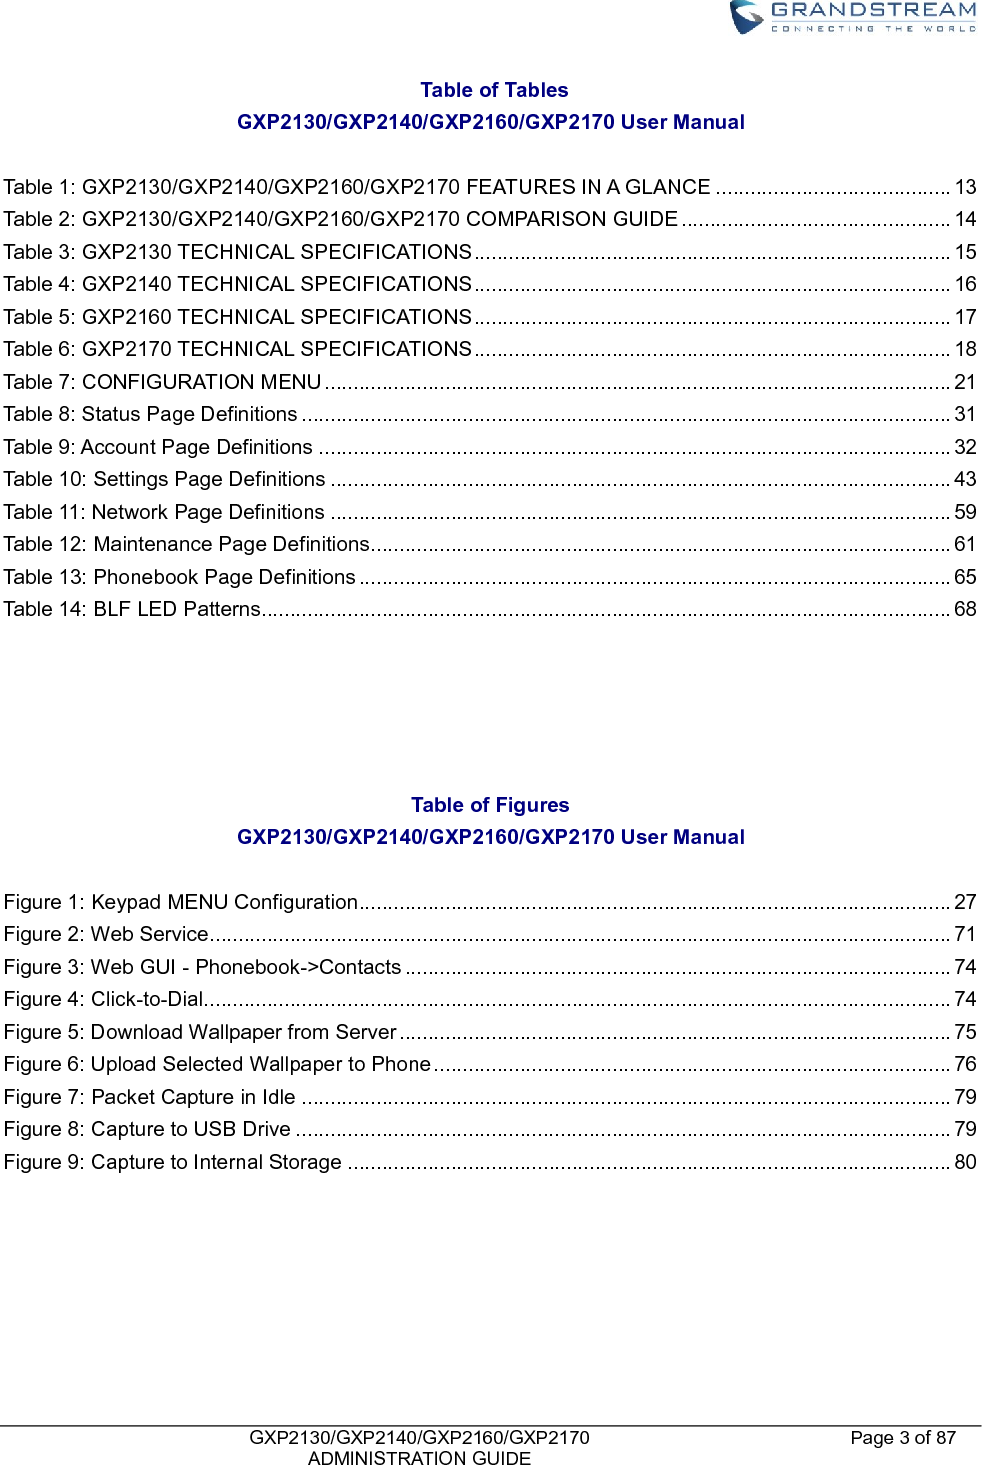    GXP2130/GXP2140/GXP2160/GXP2170   ADMINISTRATION GUIDE Page 3 of 87      Table of Tables GXP2130/GXP2140/GXP2160/GXP2170 User Manual  Table 1: GXP2130/GXP2140/GXP2160/GXP2170 FEATURES IN A GLANCE ......................................... 13 Table 2: GXP2130/GXP2140/GXP2160/GXP2170 COMPARISON GUIDE ............................................... 14 Table 3: GXP2130 TECHNICAL SPECIFICATIONS ................................................................................... 15 Table 4: GXP2140 TECHNICAL SPECIFICATIONS ................................................................................... 16 Table 5: GXP2160 TECHNICAL SPECIFICATIONS ................................................................................... 17 Table 6: GXP2170 TECHNICAL SPECIFICATIONS ................................................................................... 18 Table 7: CONFIGURATION MENU ............................................................................................................. 21 Table 8: Status Page Definitions ................................................................................................................. 31 Table 9: Account Page Definitions .............................................................................................................. 32 Table 10: Settings Page Definitions ............................................................................................................ 43 Table 11: Network Page Definitions ............................................................................................................ 59 Table 12: Maintenance Page Definitions ..................................................................................................... 61 Table 13: Phonebook Page Definitions ....................................................................................................... 65 Table 14: BLF LED Patterns........................................................................................................................ 68      Table of Figures GXP2130/GXP2140/GXP2160/GXP2170 User Manual  Figure 1: Keypad MENU Configuration ....................................................................................................... 27 Figure 2: Web Service ................................................................................................................................. 71 Figure 3: Web GUI - Phonebook-&gt;Contacts ............................................................................................... 74 Figure 4: Click-to-Dial .................................................................................................................................. 74 Figure 5: Download Wallpaper from Server ................................................................................................ 75 Figure 6: Upload Selected Wallpaper to Phone .......................................................................................... 76 Figure 7: Packet Capture in Idle ................................................................................................................. 79 Figure 8: Capture to USB Drive .................................................................................................................. 79 Figure 9: Capture to Internal Storage ......................................................................................................... 80      